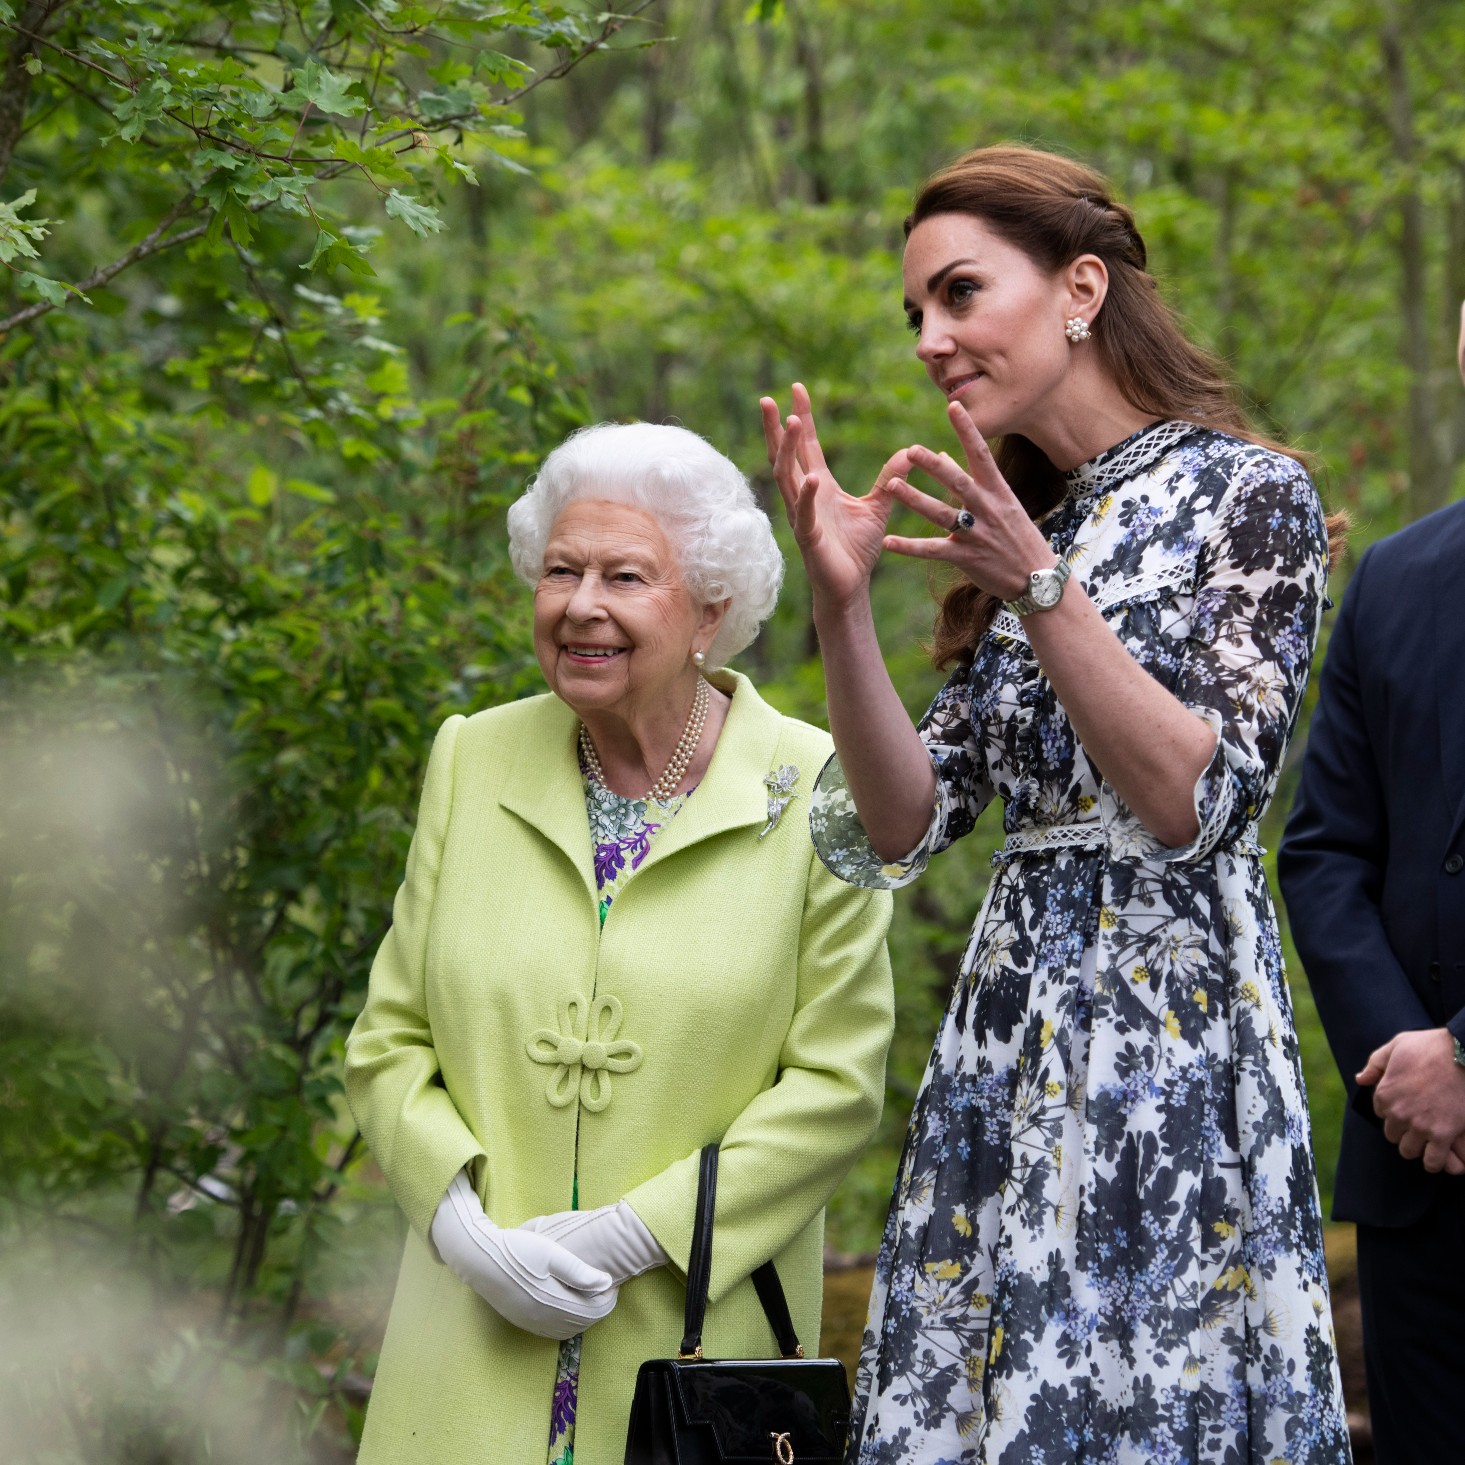 Kate Middleton Was Adorably Nervous When the Queen Visited Her “Back to Nature” Garden | 3zBTu5mPsQWcGASVtq54QB